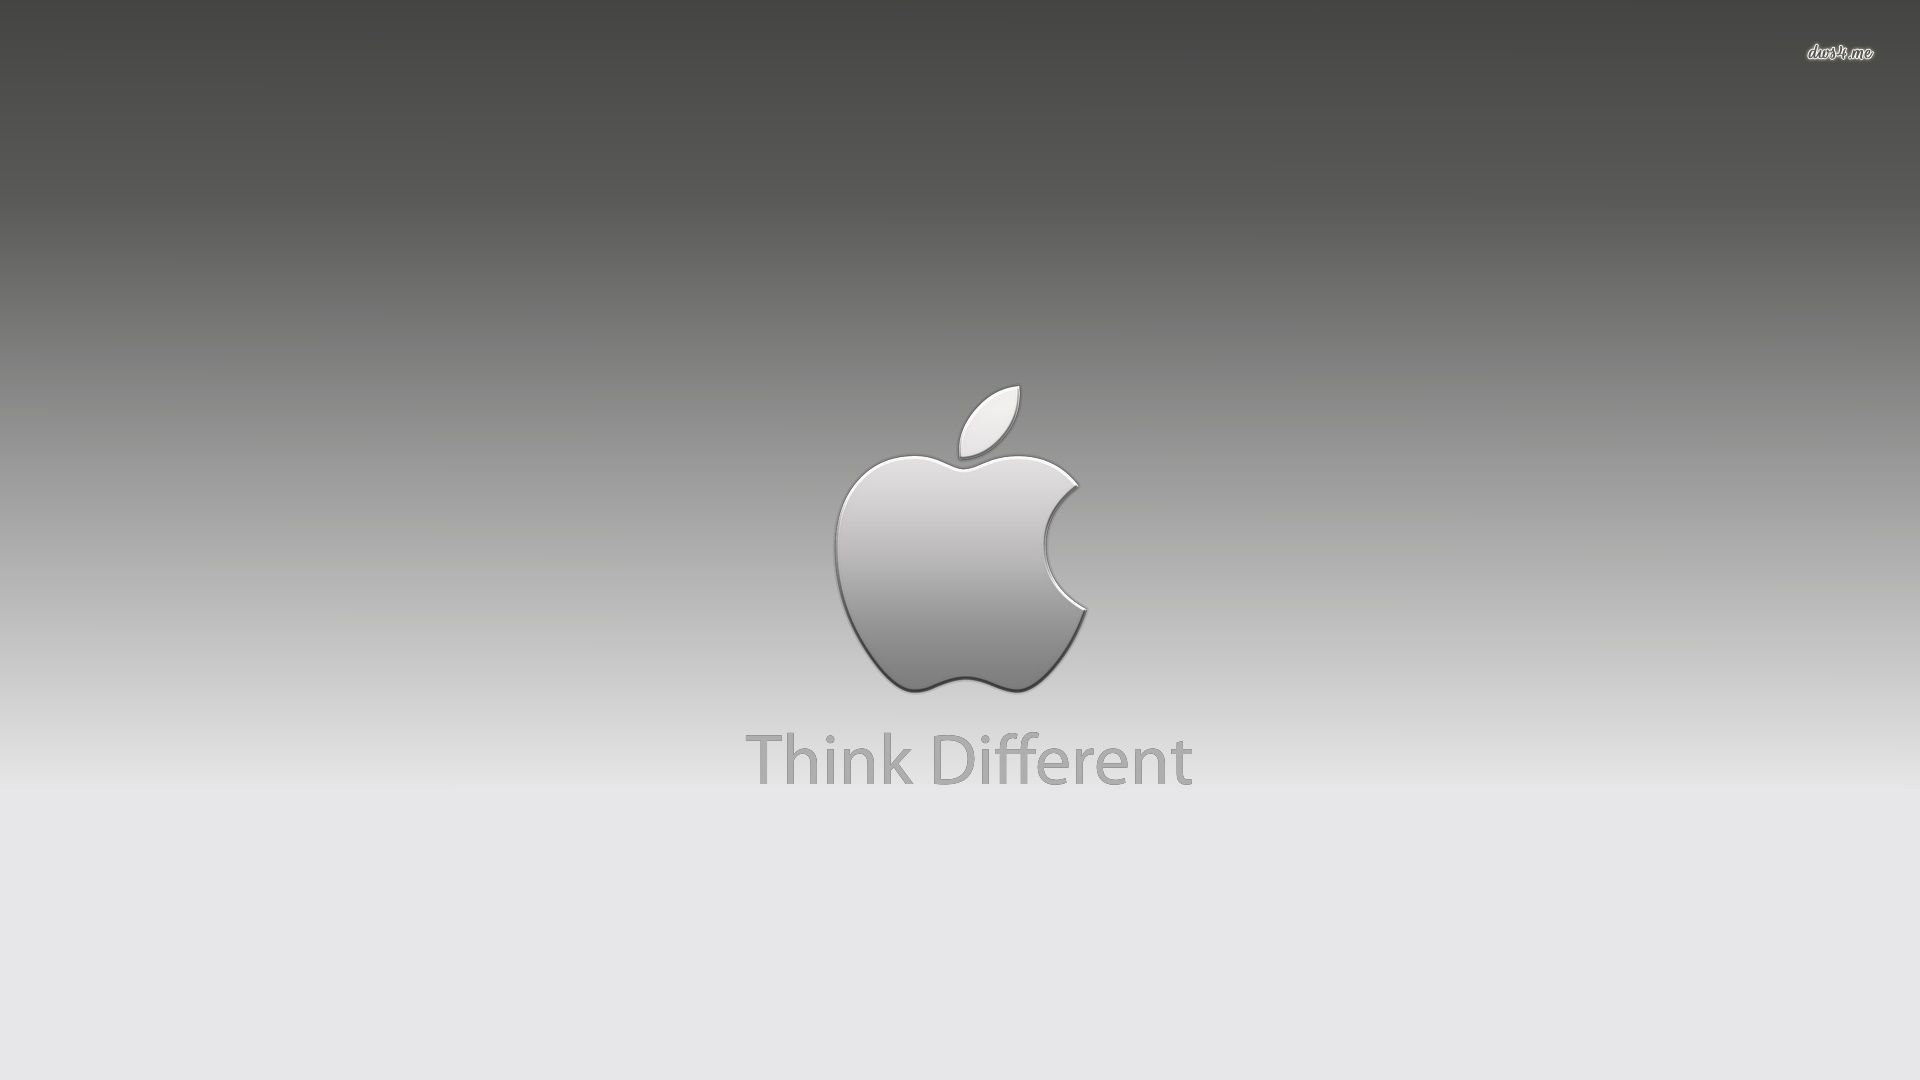 Think Different wallpaper - Computer wallpapers -